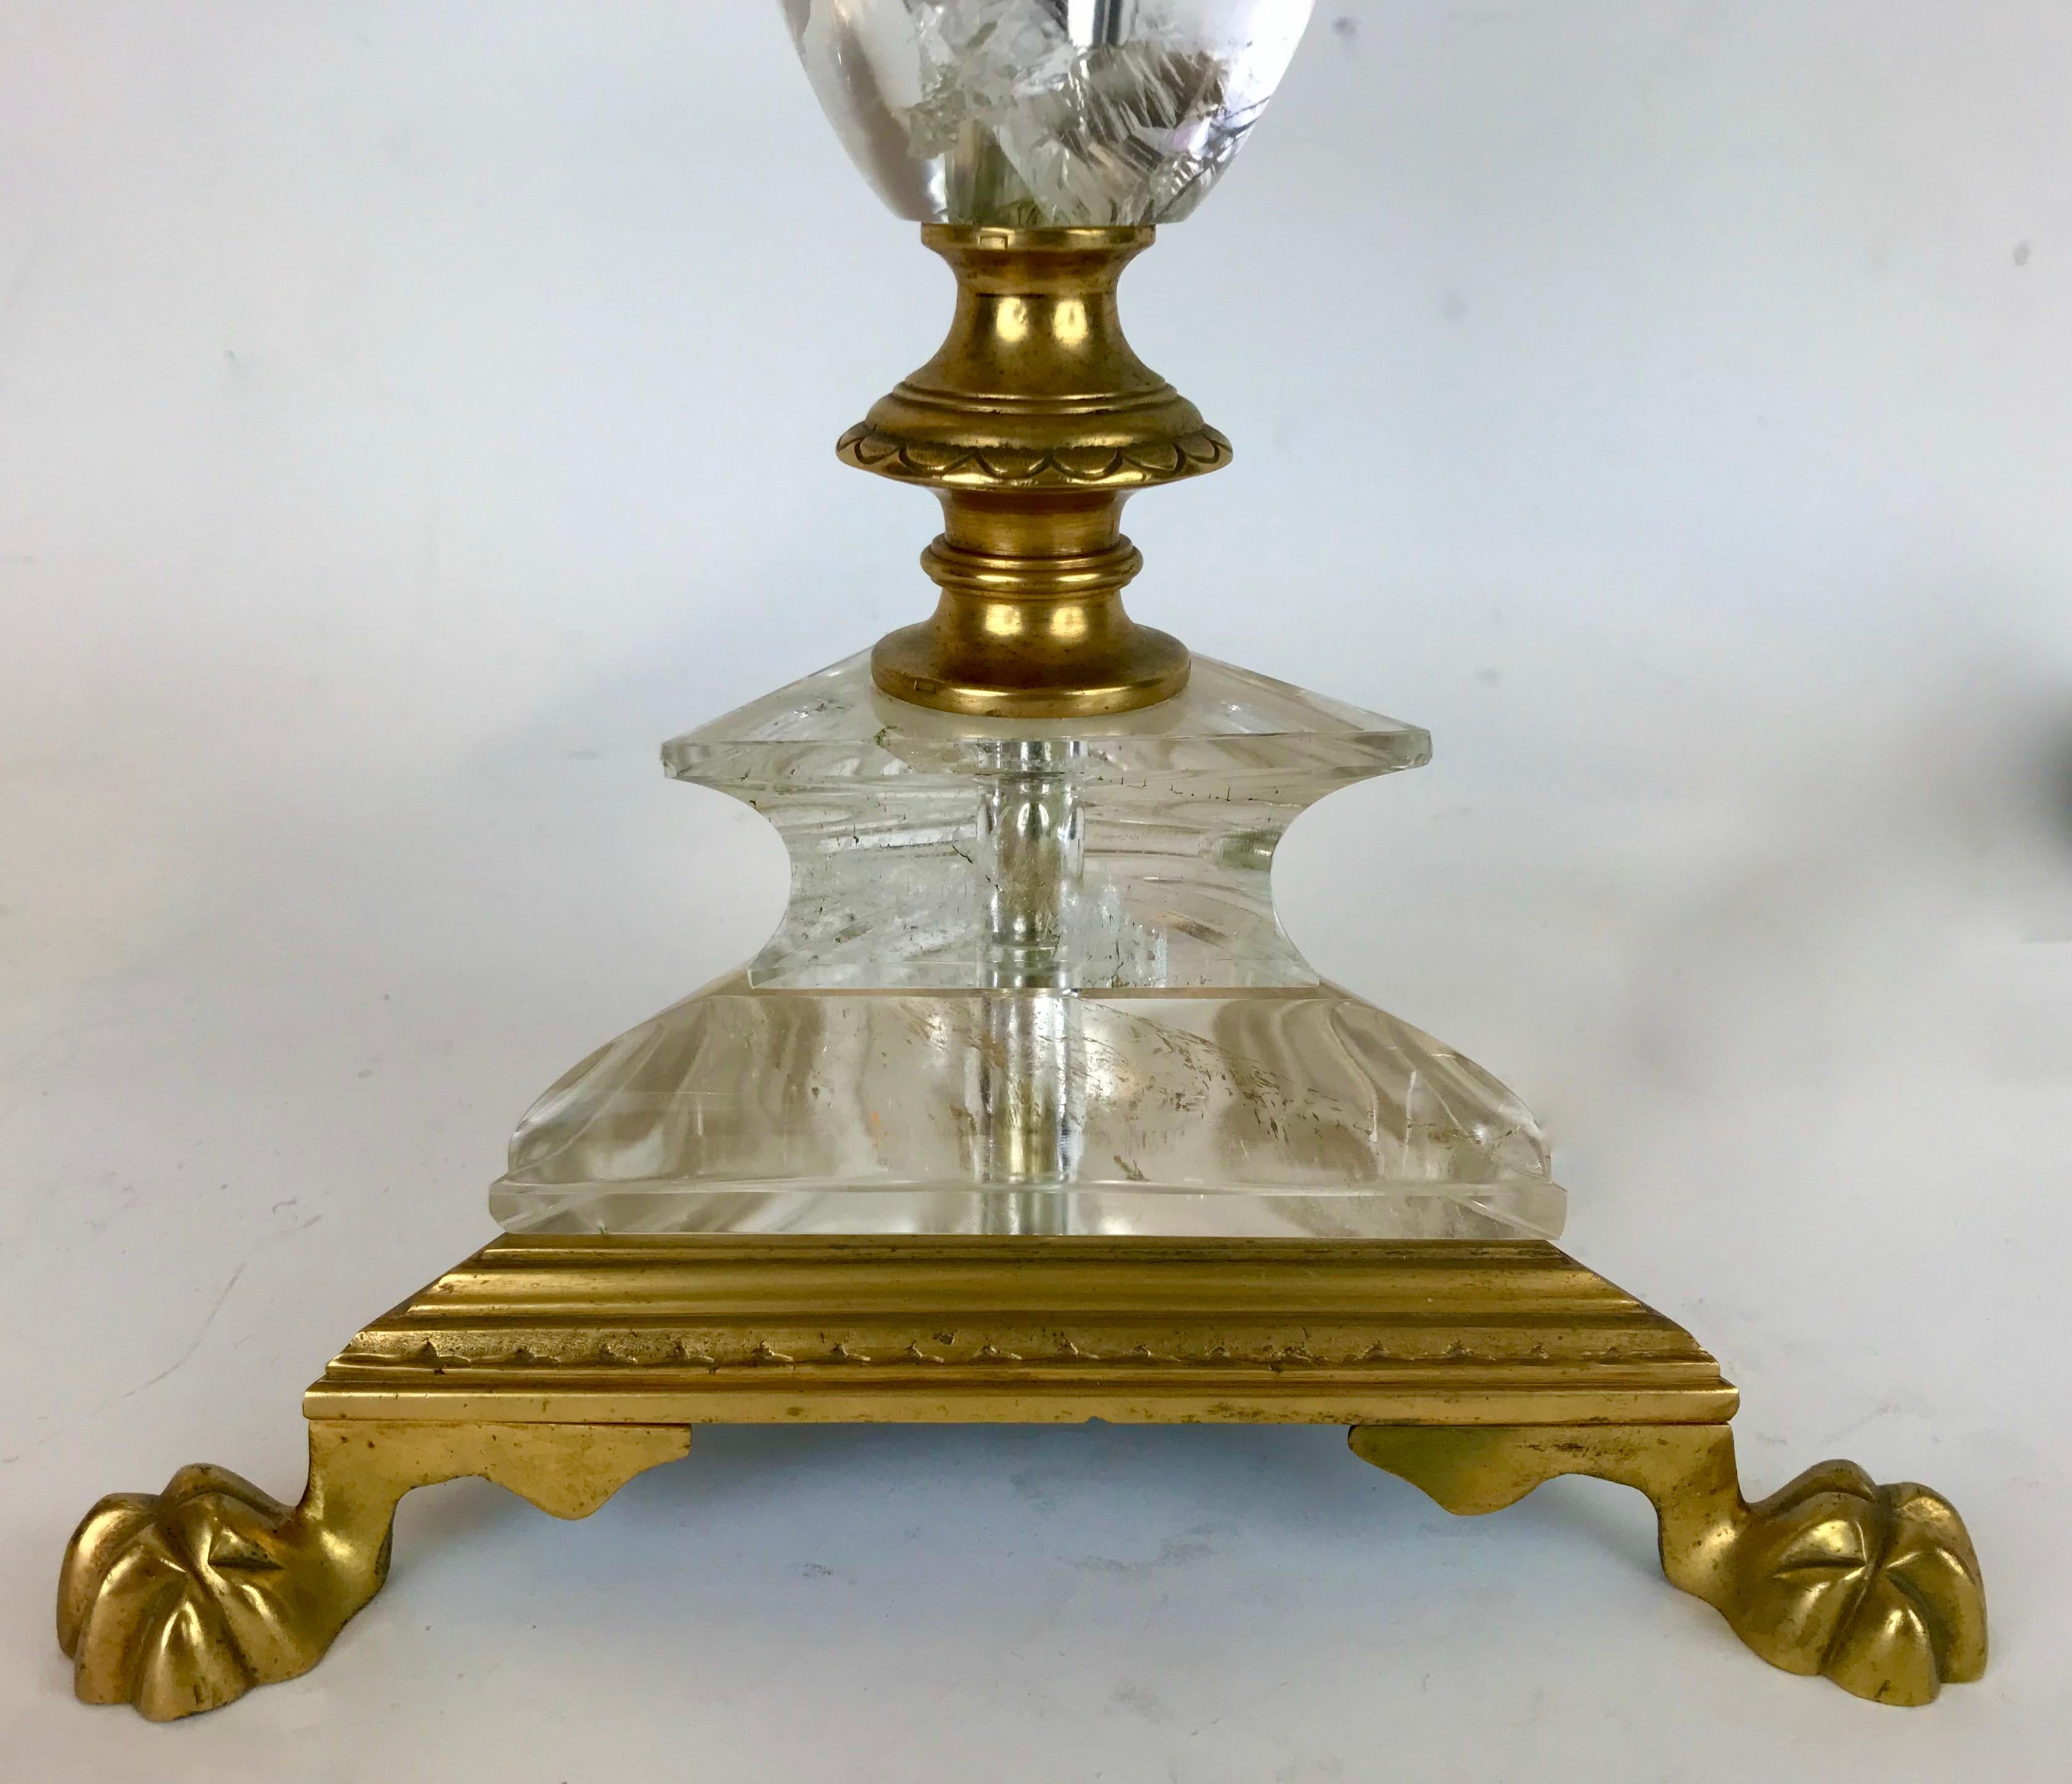 This finely detailed pricket stick style lamp features rock crystal quartz mounted with bronze fittings on a triangular base ending in paw feet.